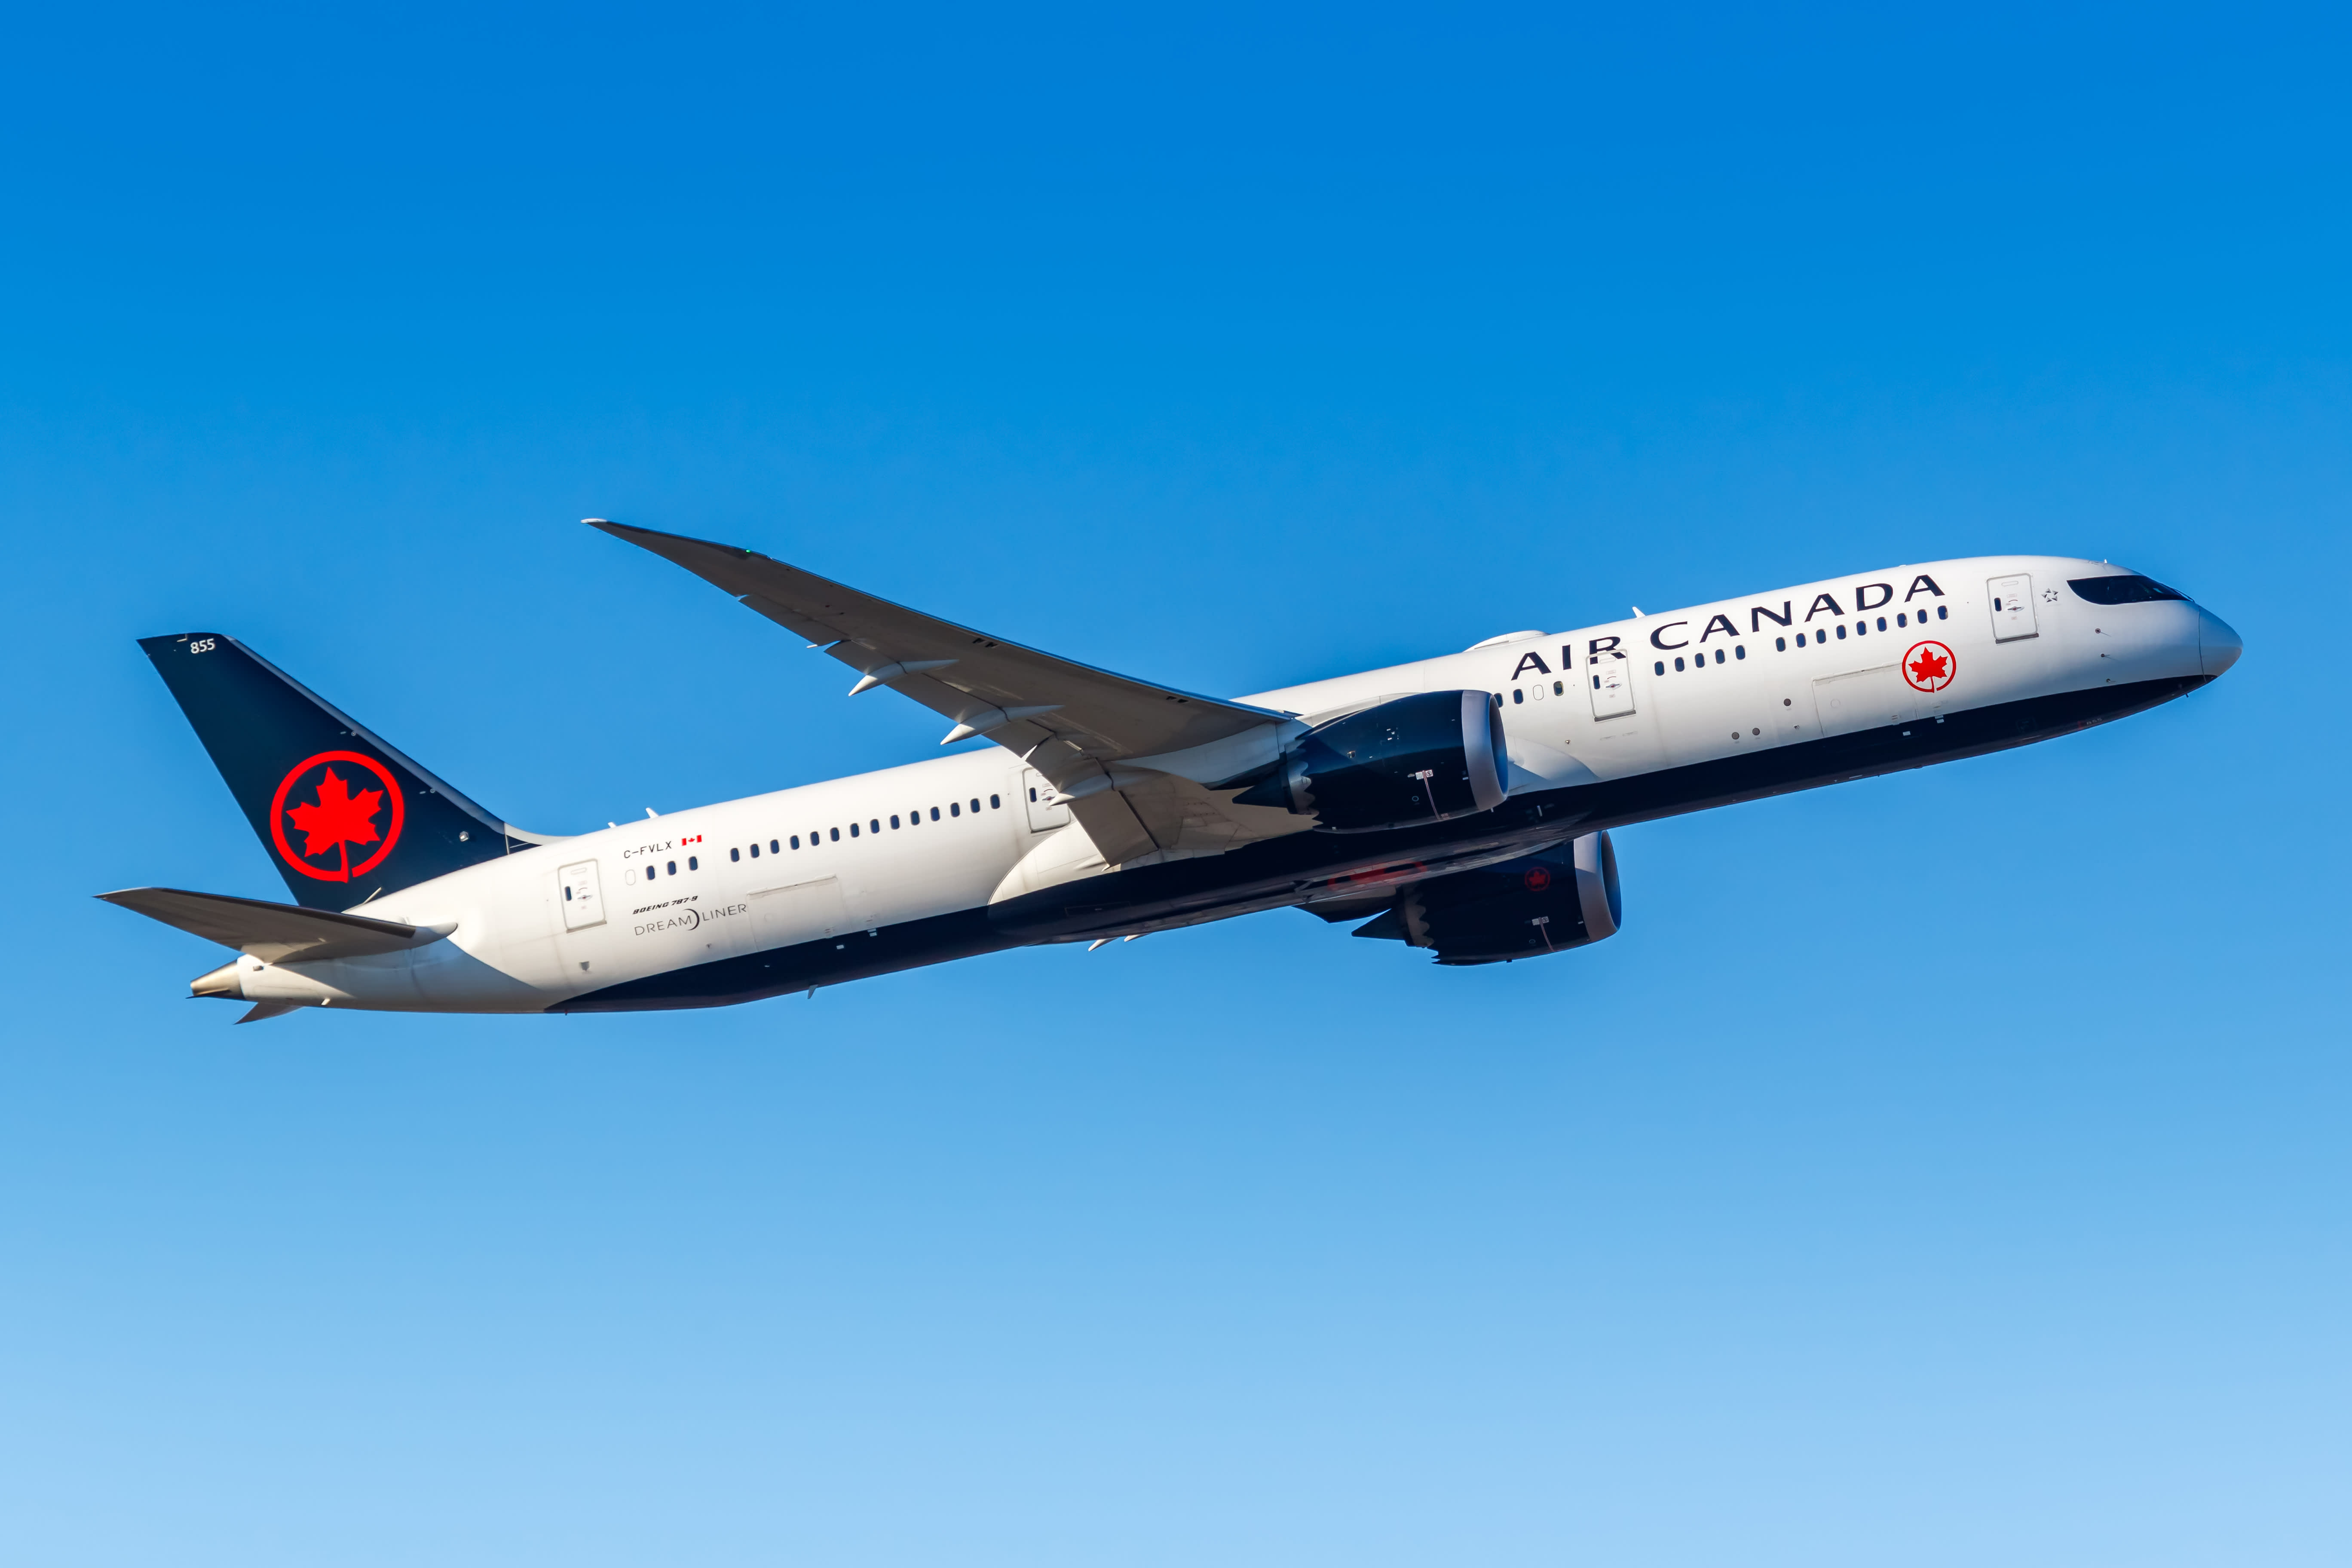 Chase Launches Air Canada Aeroplan Credit Card